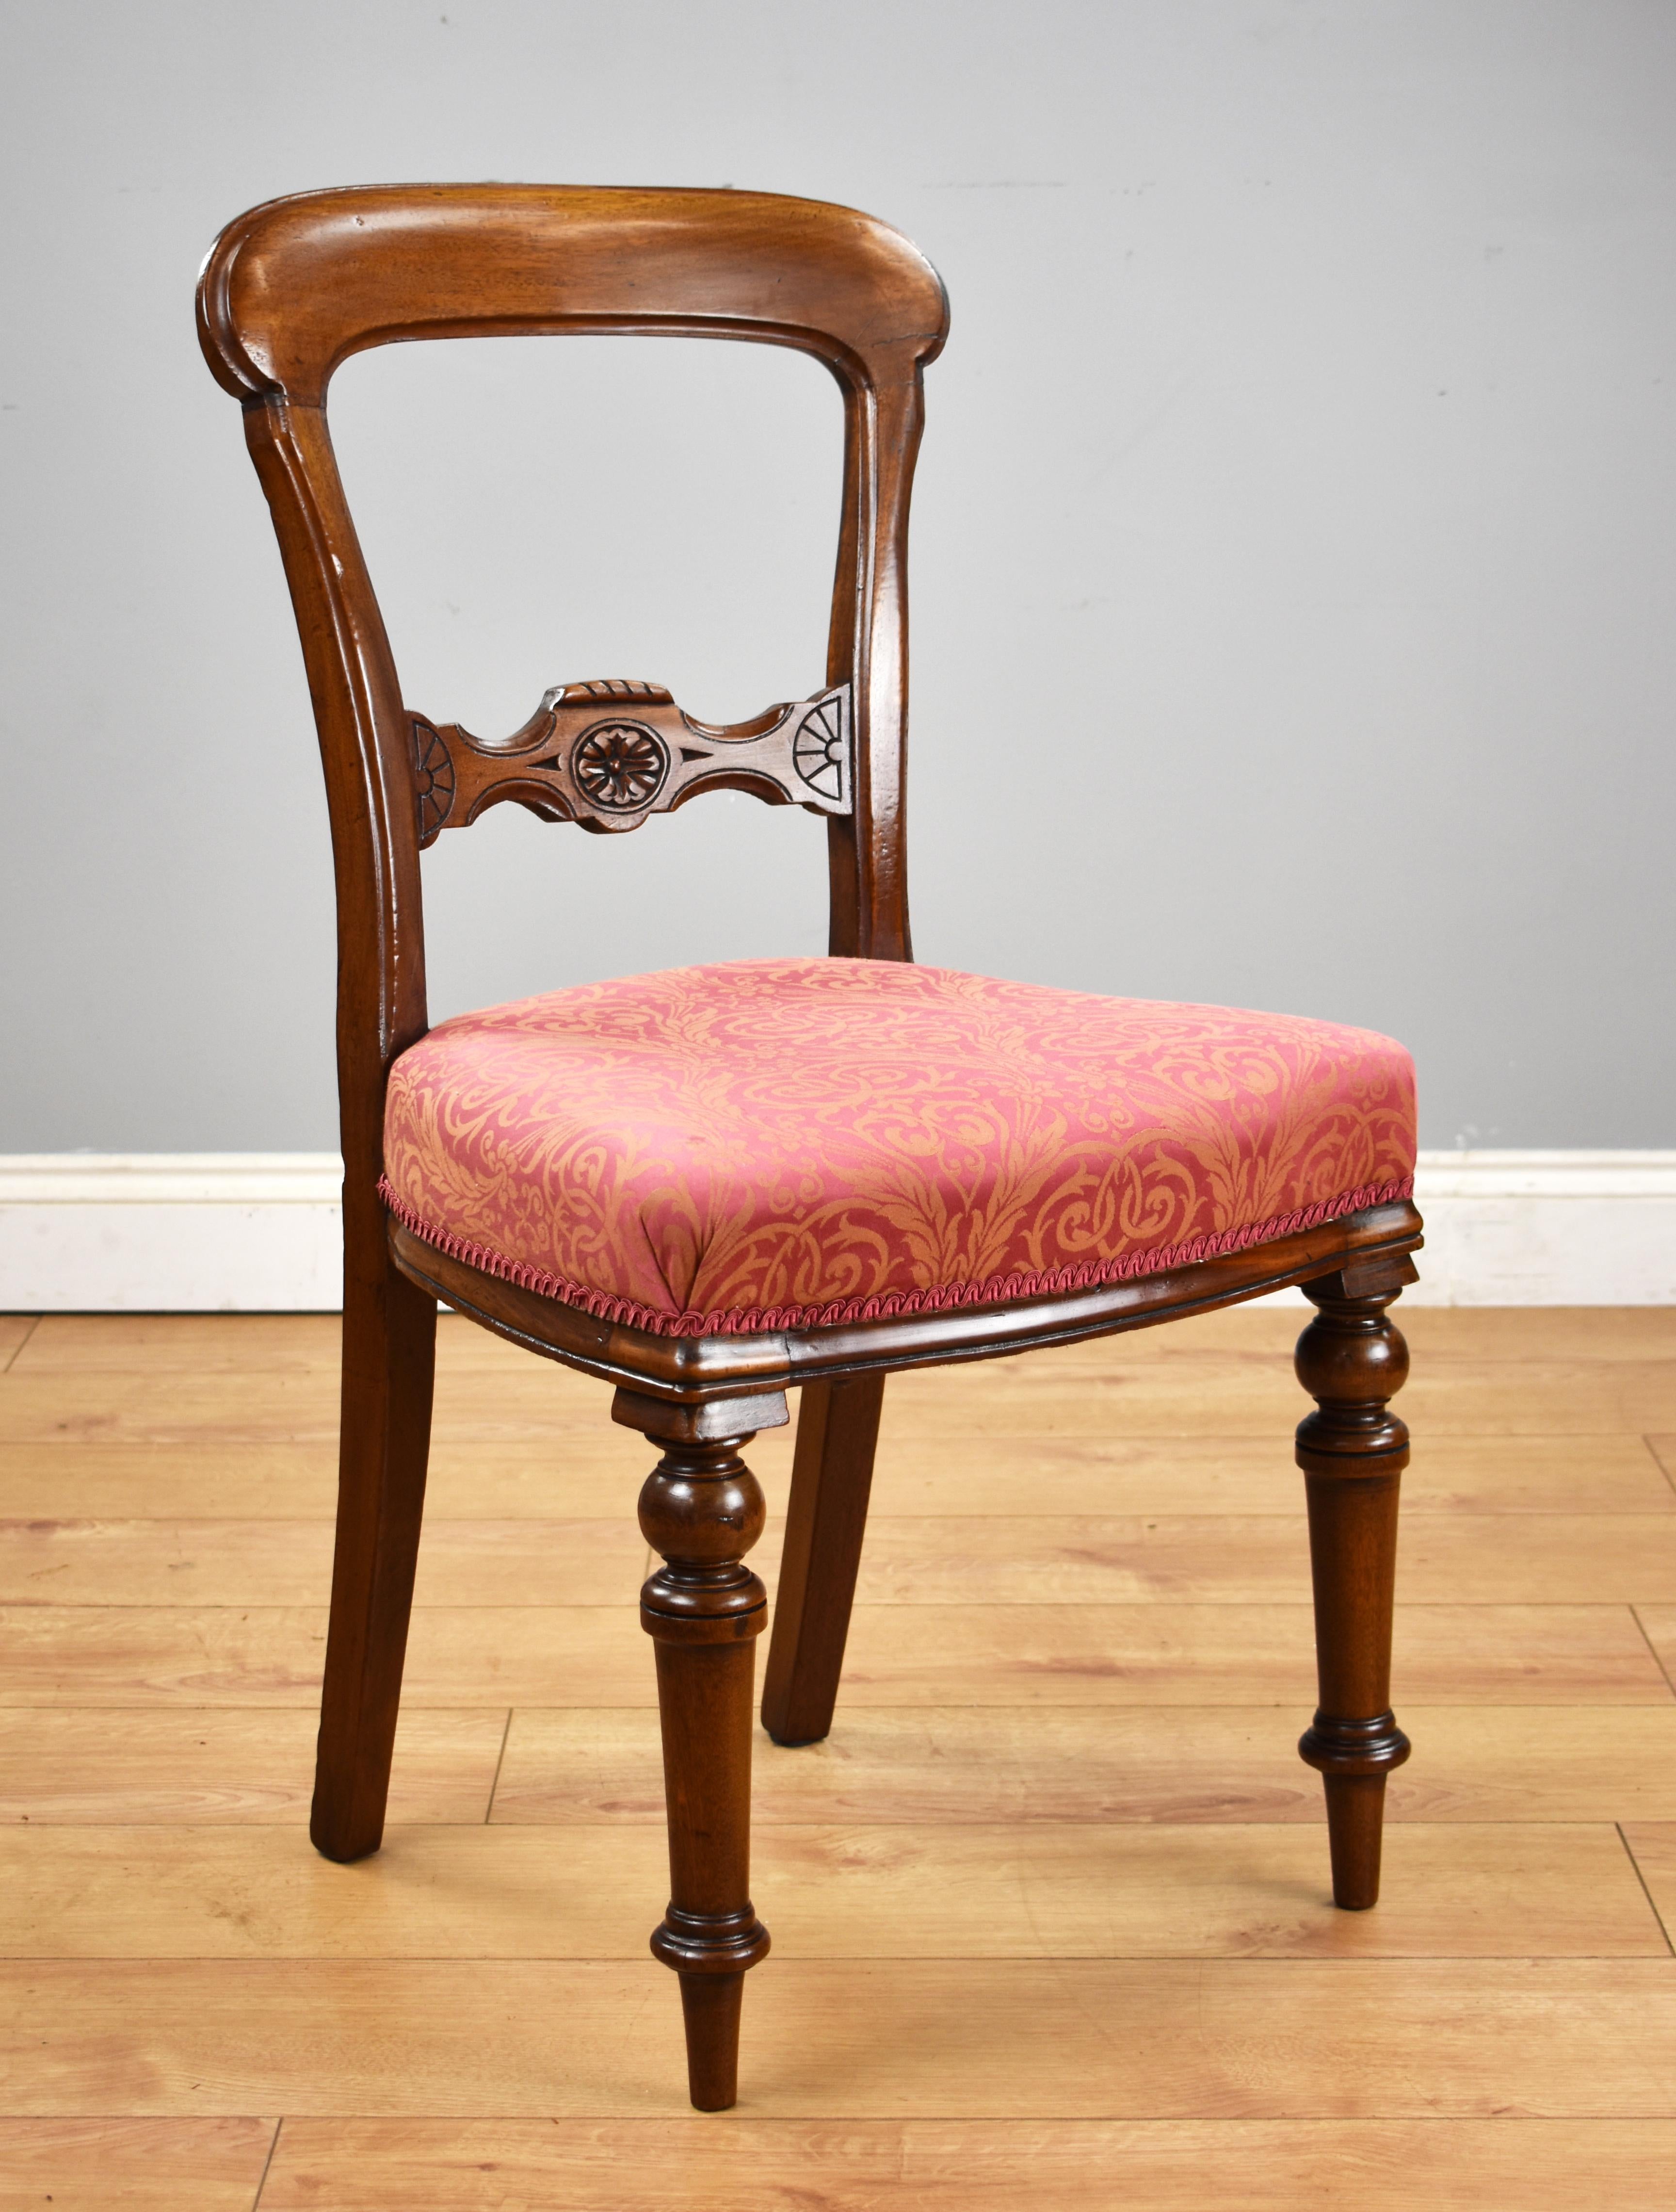 For sale is a good quality set of 6 Victorian mahogany dining chairs, having a carved back rail above an upholstered seat, standing on elegantly turned legs. All of the chairs are structurally sound with no loose joints and remain in very good